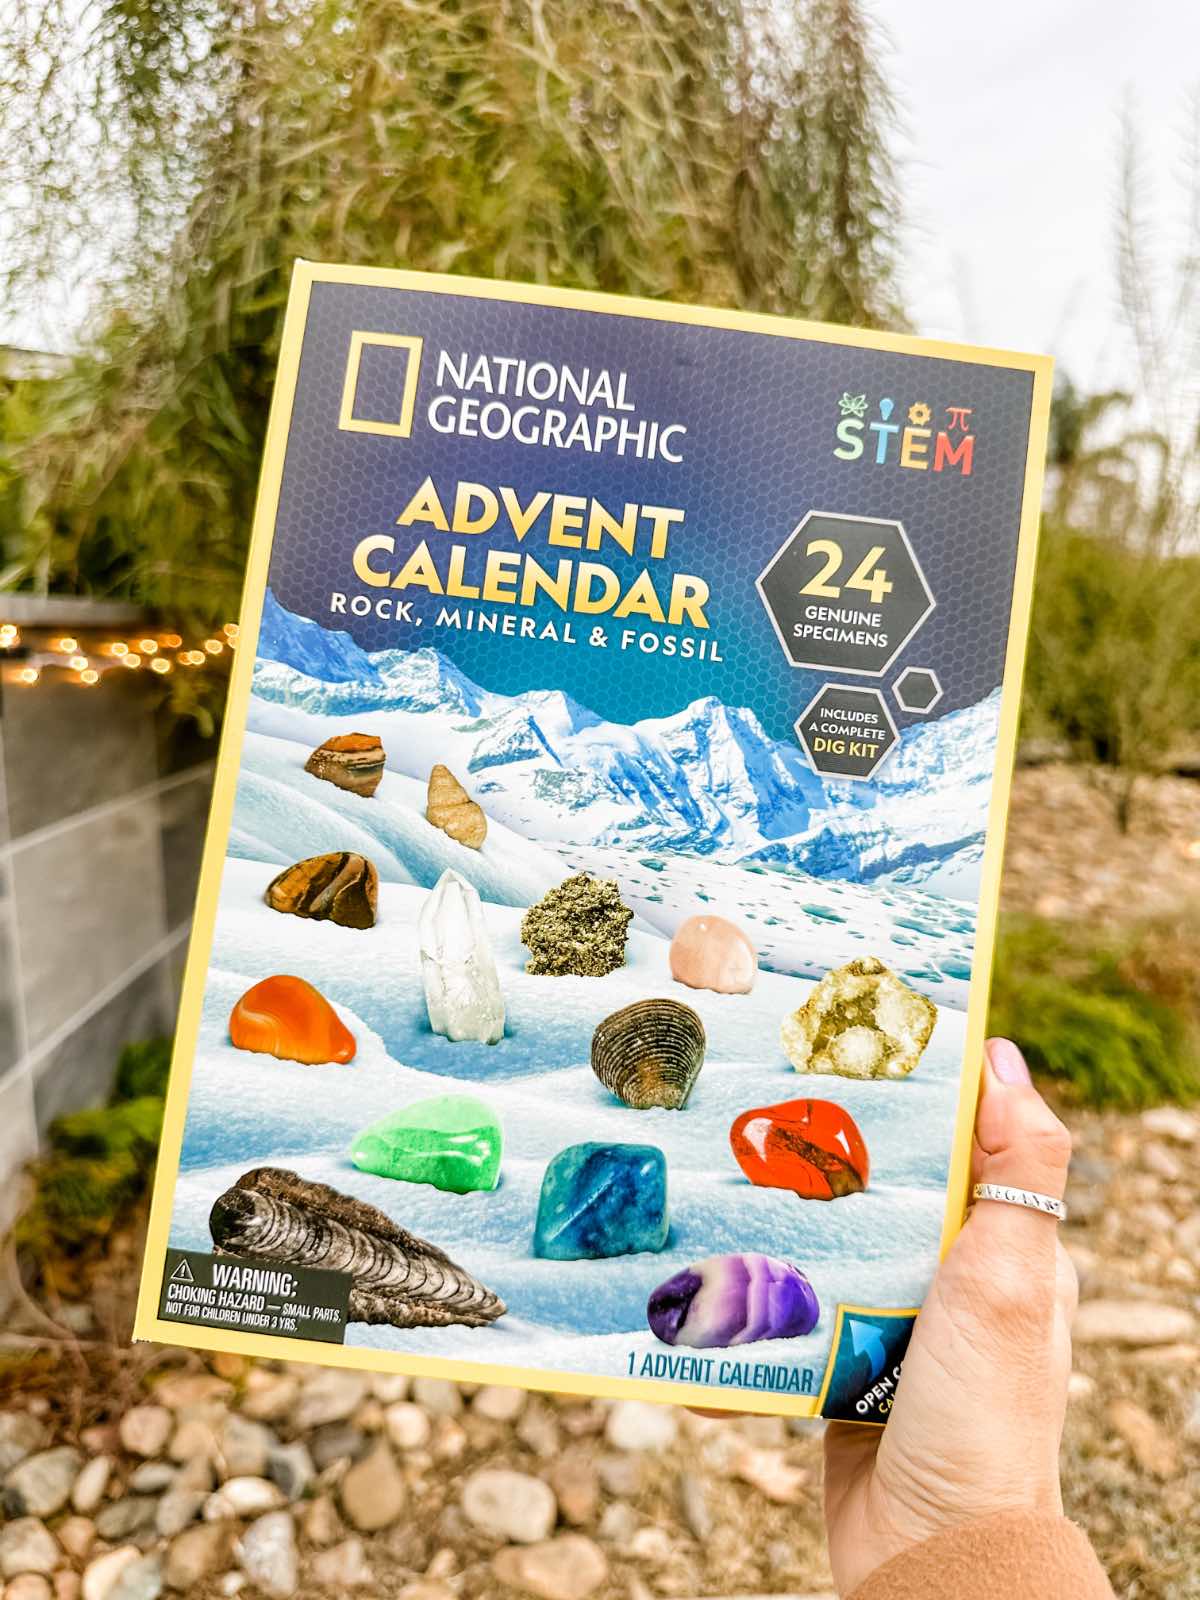 Holding out the National Geographic advent calendar with gemstones. 